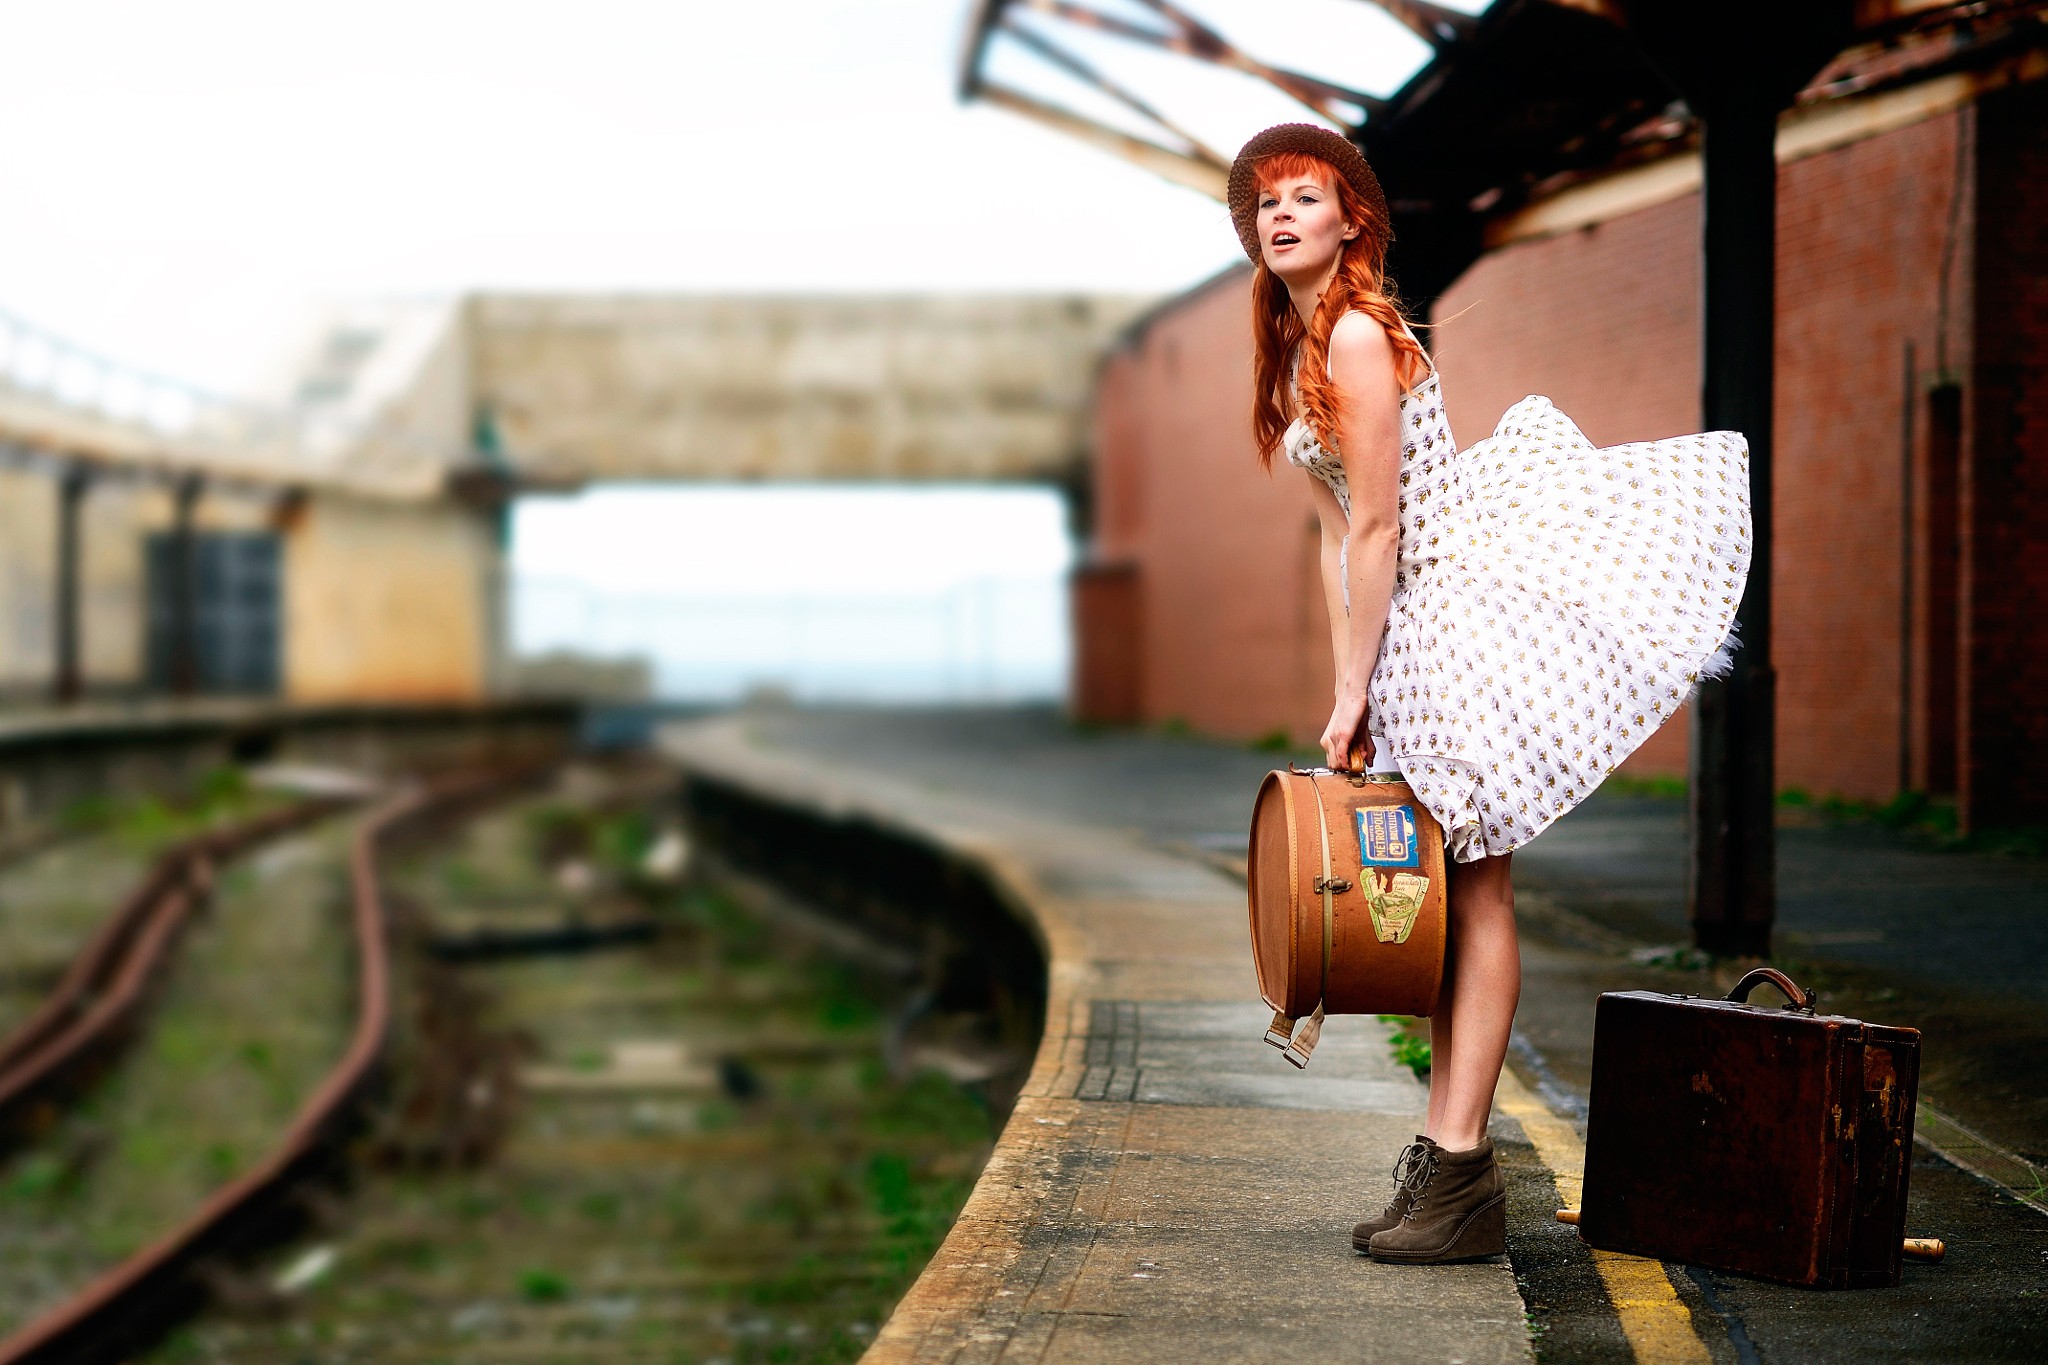 People 2048x1365 suitcase women train station model railway open mouth dress white dress white clothing wedge shoes hat women with hats standing urban women outdoors